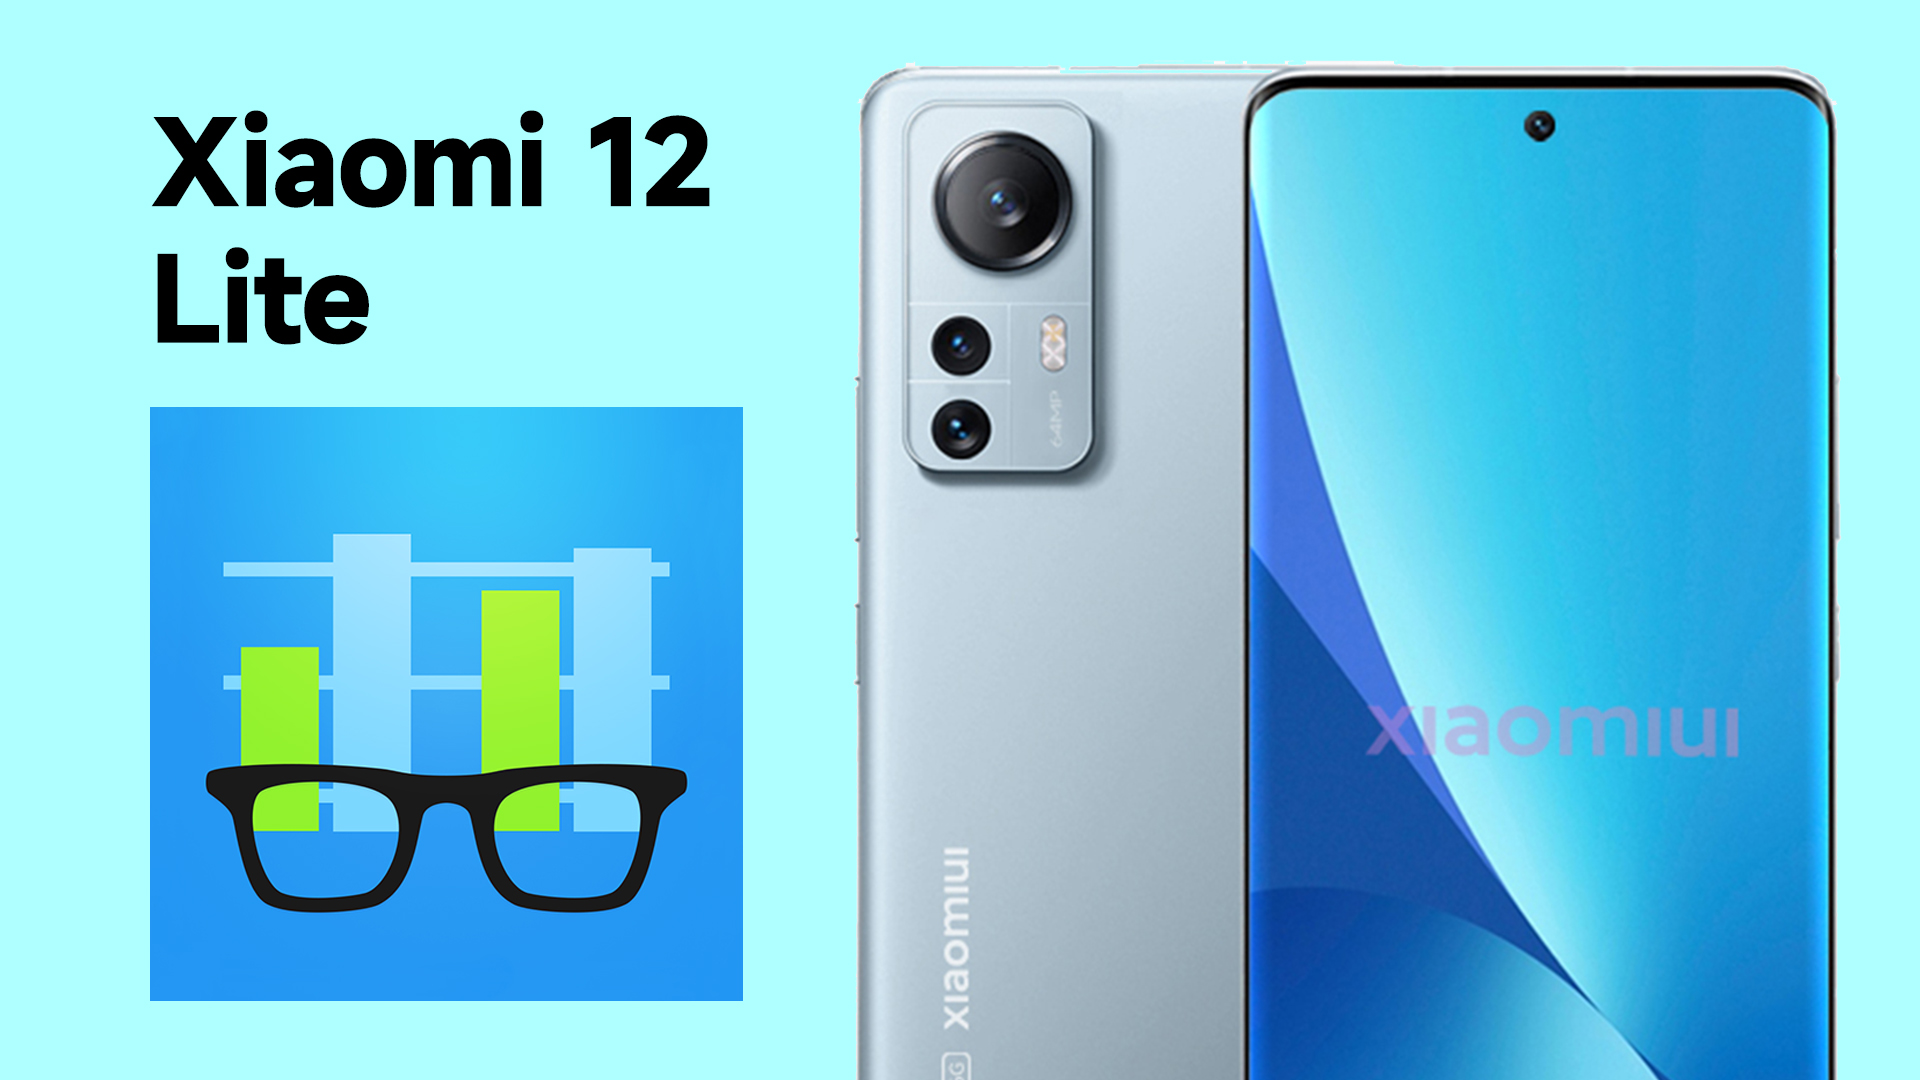 Xiaomi 12 Lite spotted on the Geekbench certification with suprising Qualcomm chipset